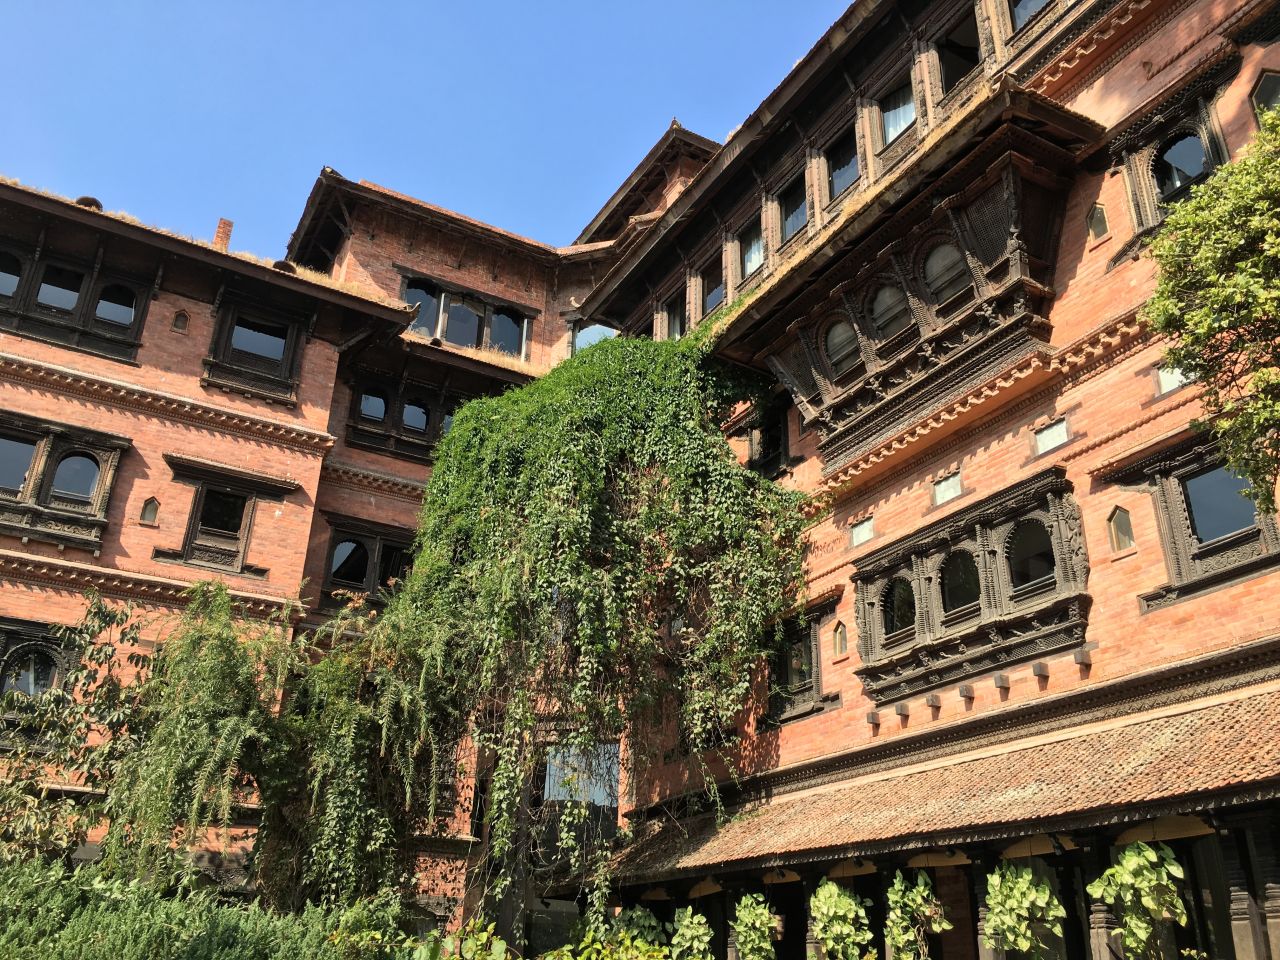 Originally built in the 1970s, this five-star property features Newari crafts and architecture dating all the way back to the 13th Century.